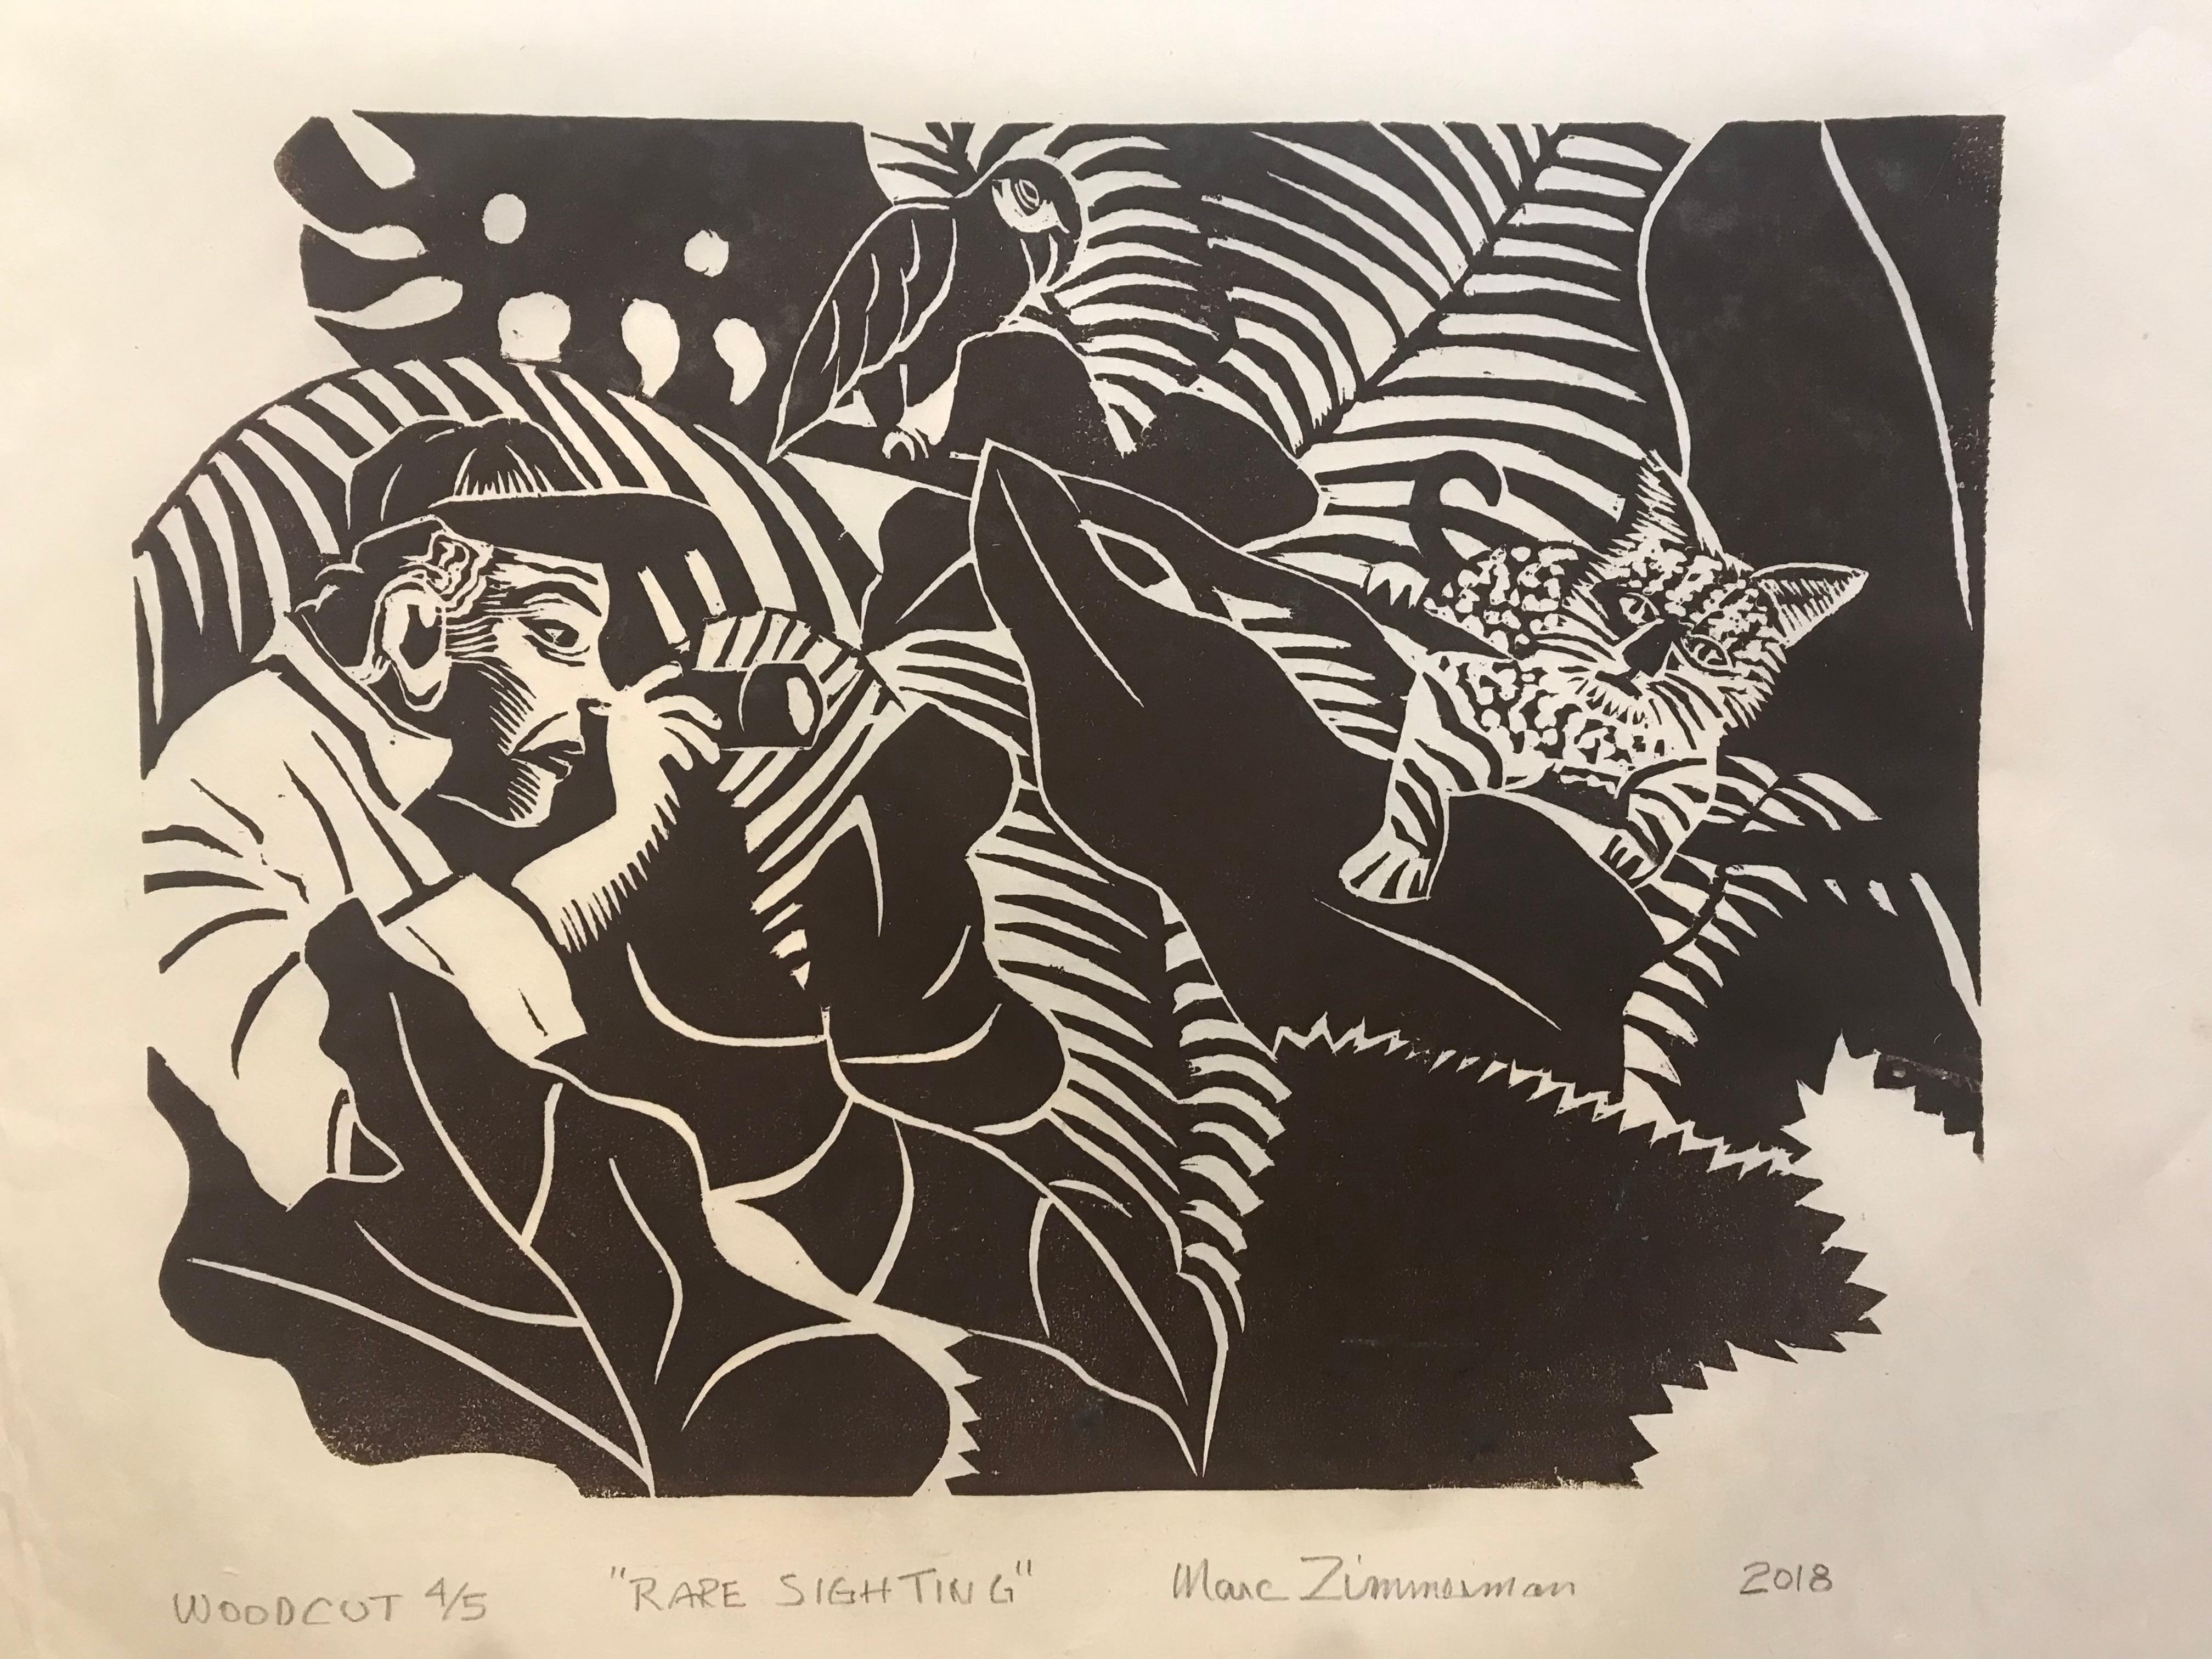 Finding a pussy cat in the deep jungle was truly a rare sighting for this naturalist. Black ink on buff rice paper.

Rare Sighting - Figurative Print - Woodcut Print By Marc Zimmerman

This masterpiece is exhibited in the Zimmerman Gallery, Carmel